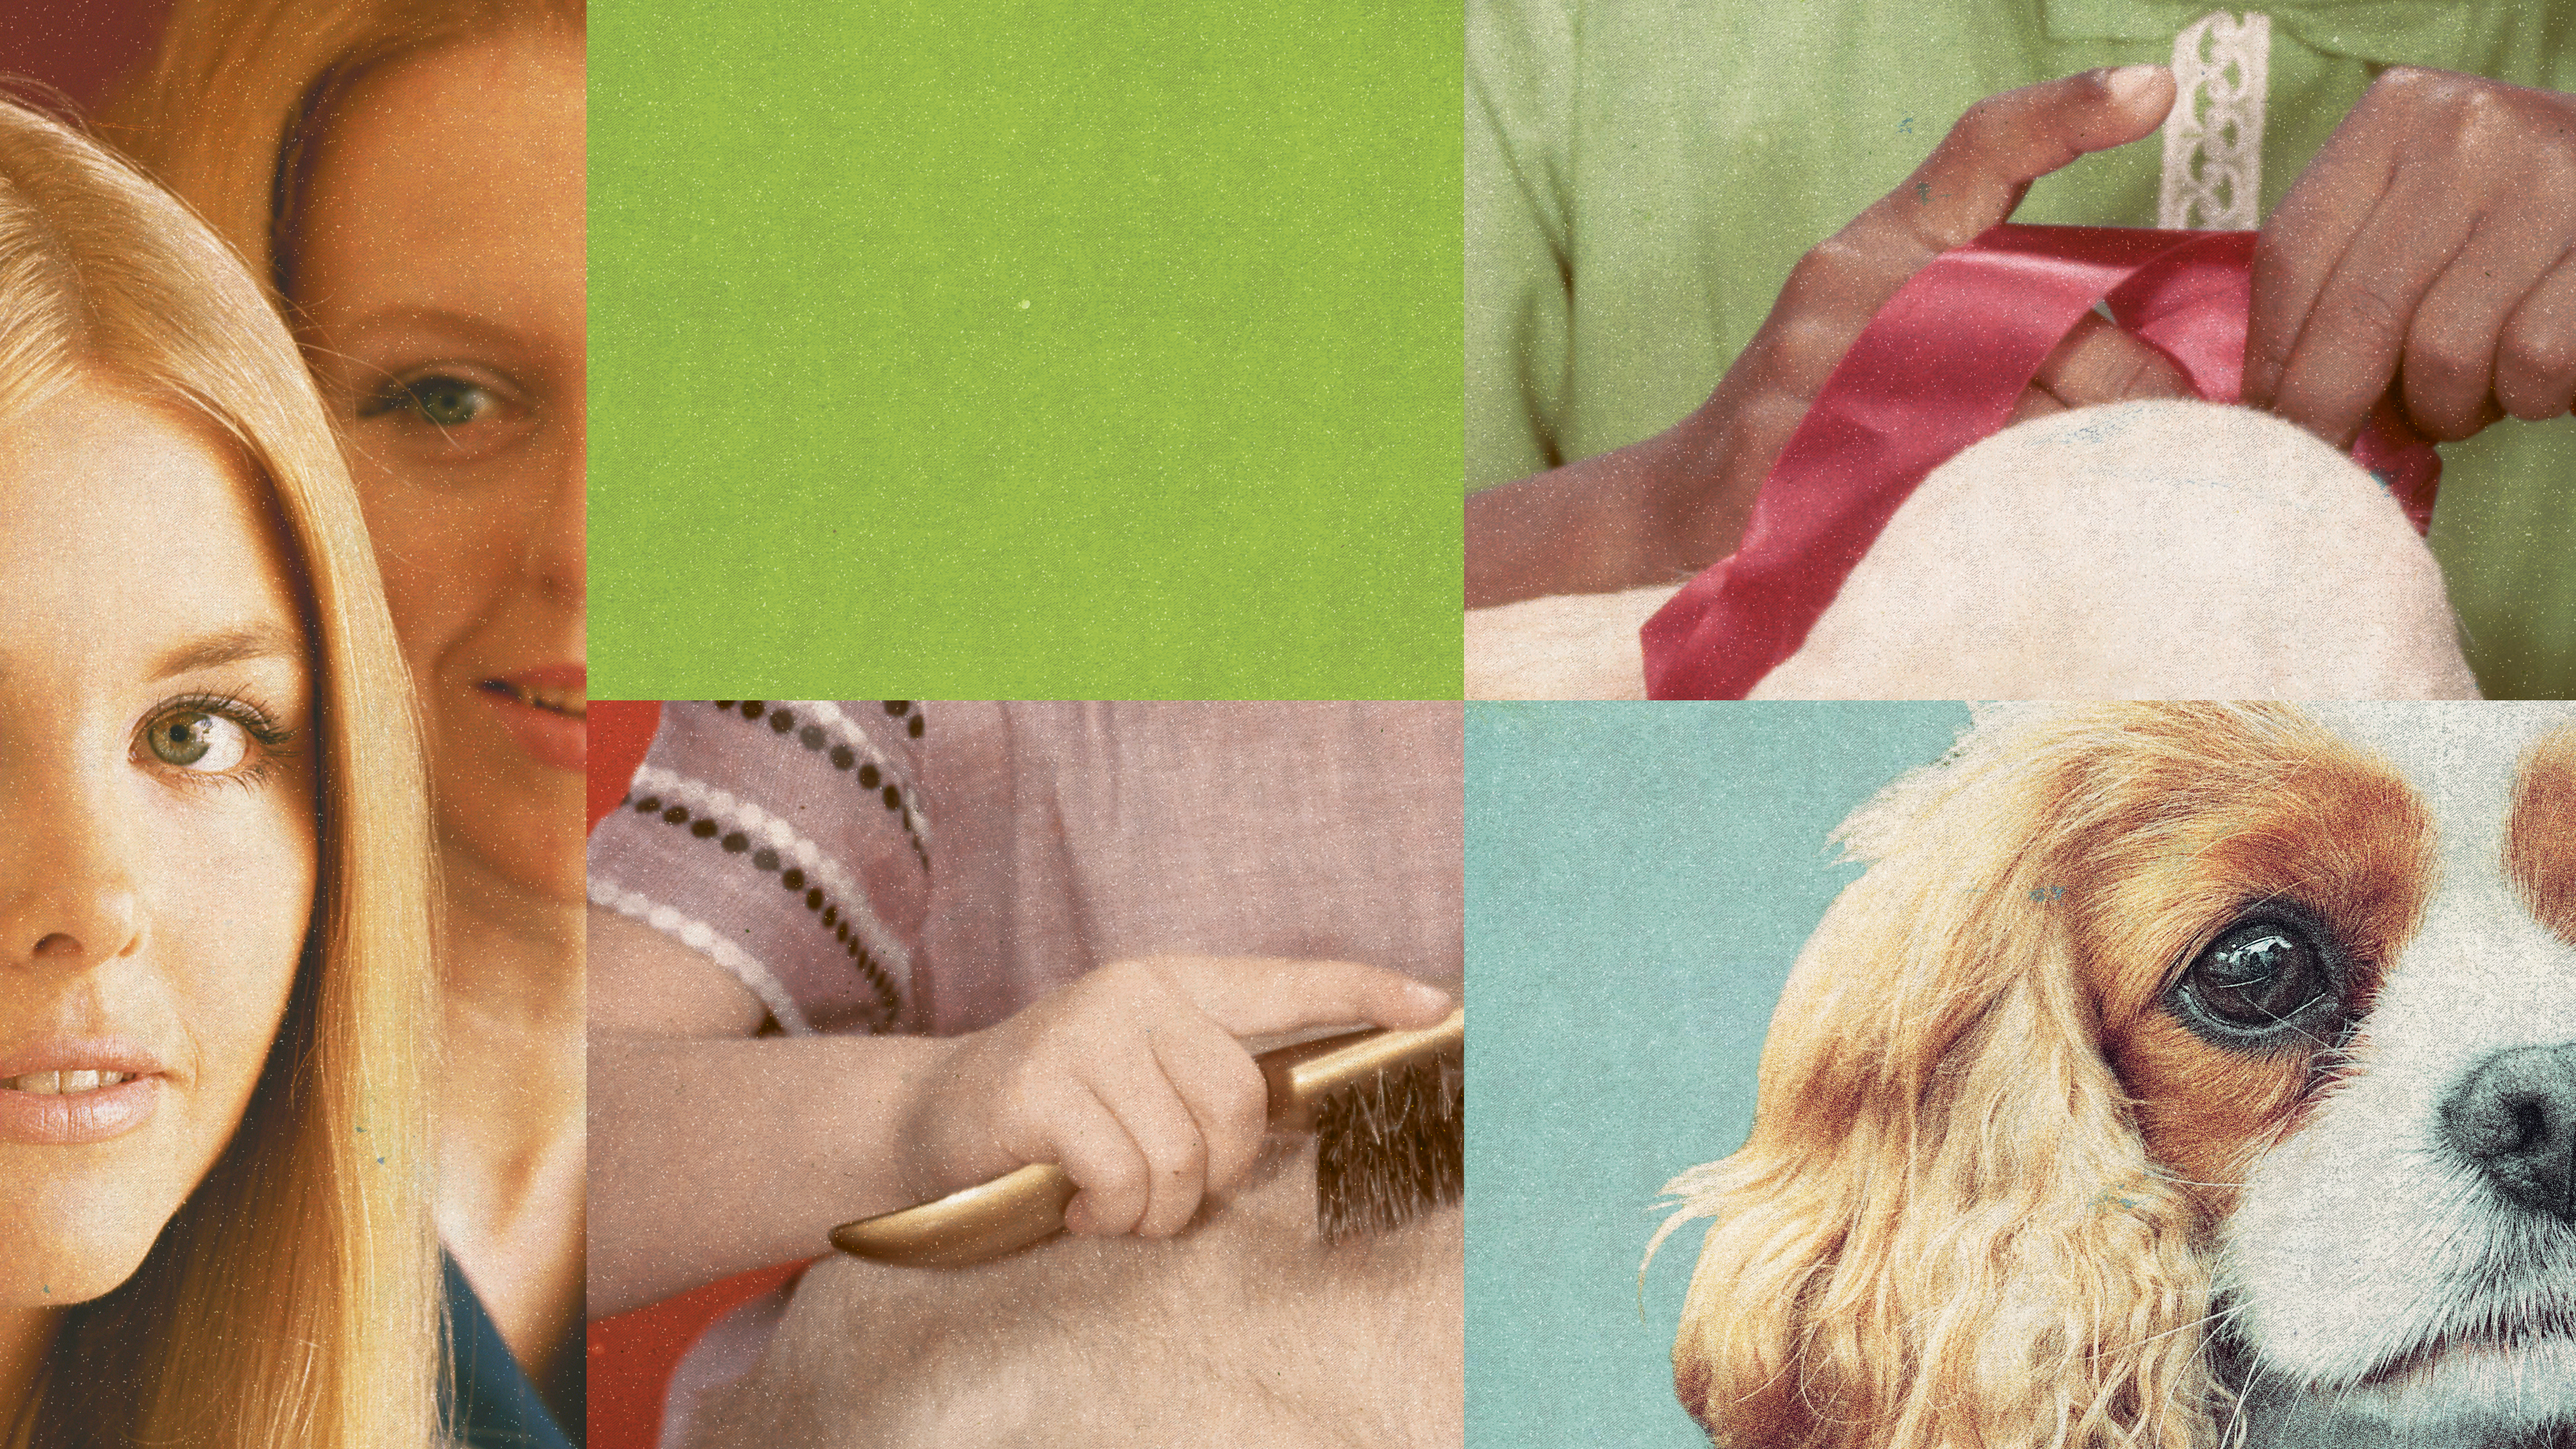 A collage of images showing two girls, a dog, and hands holding a brush